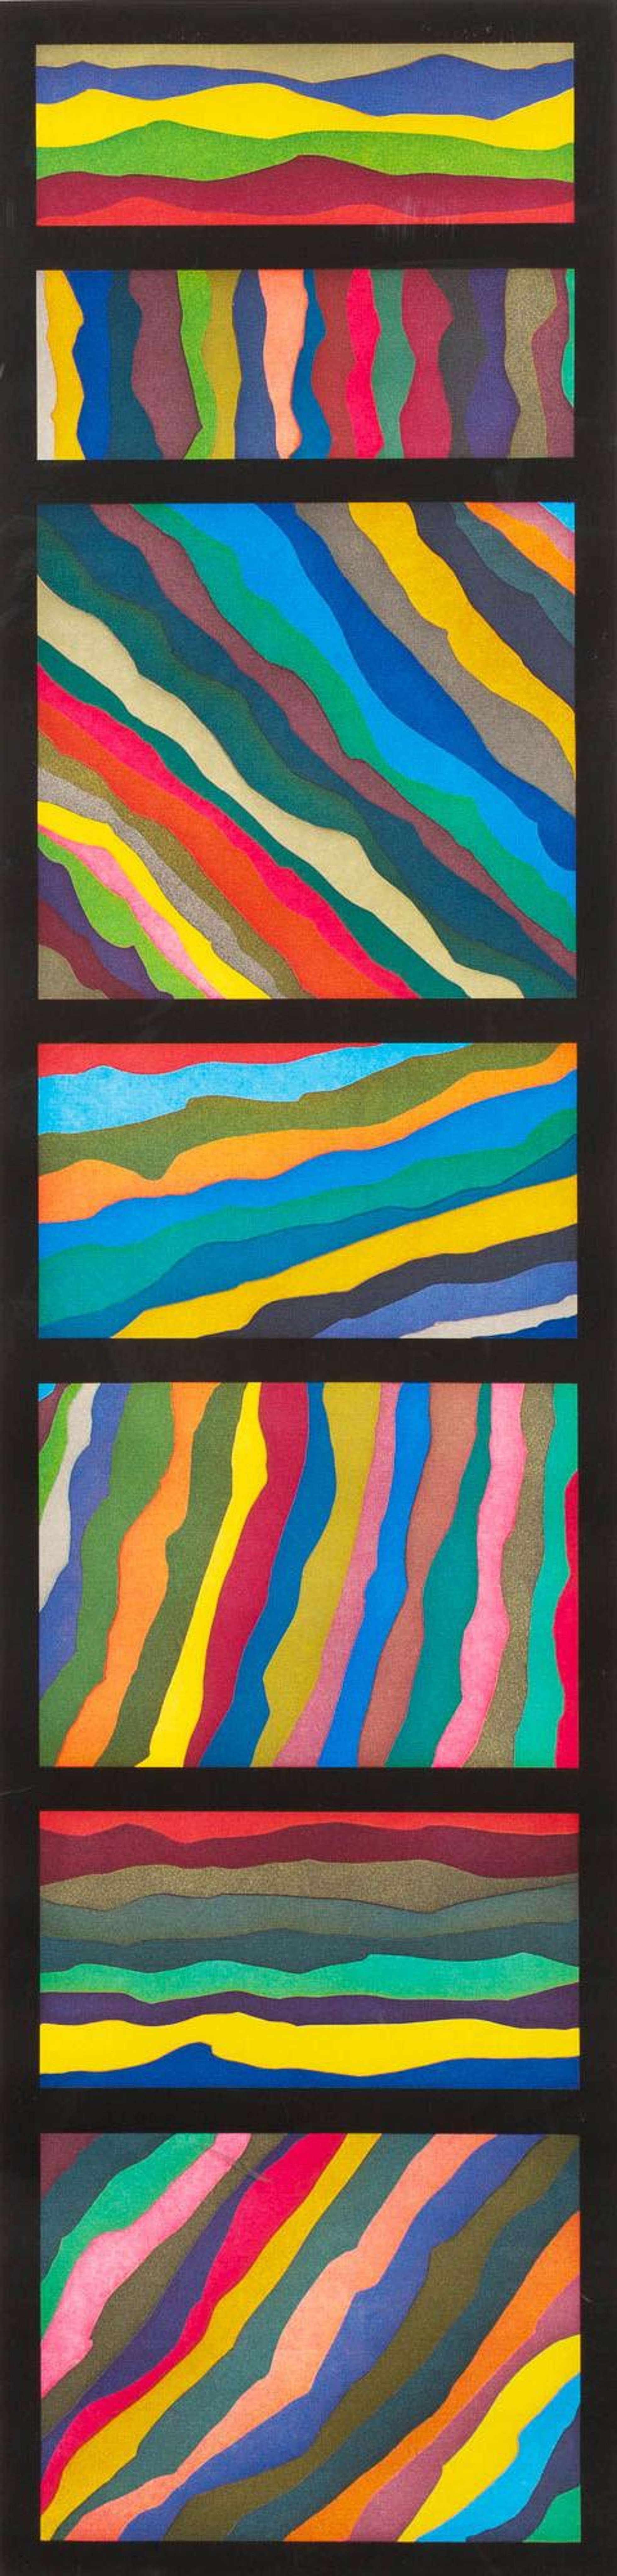 Irregular Wavy Bands In All Directions - Signed Print by Sol Lewitt 1997 - MyArtBroker